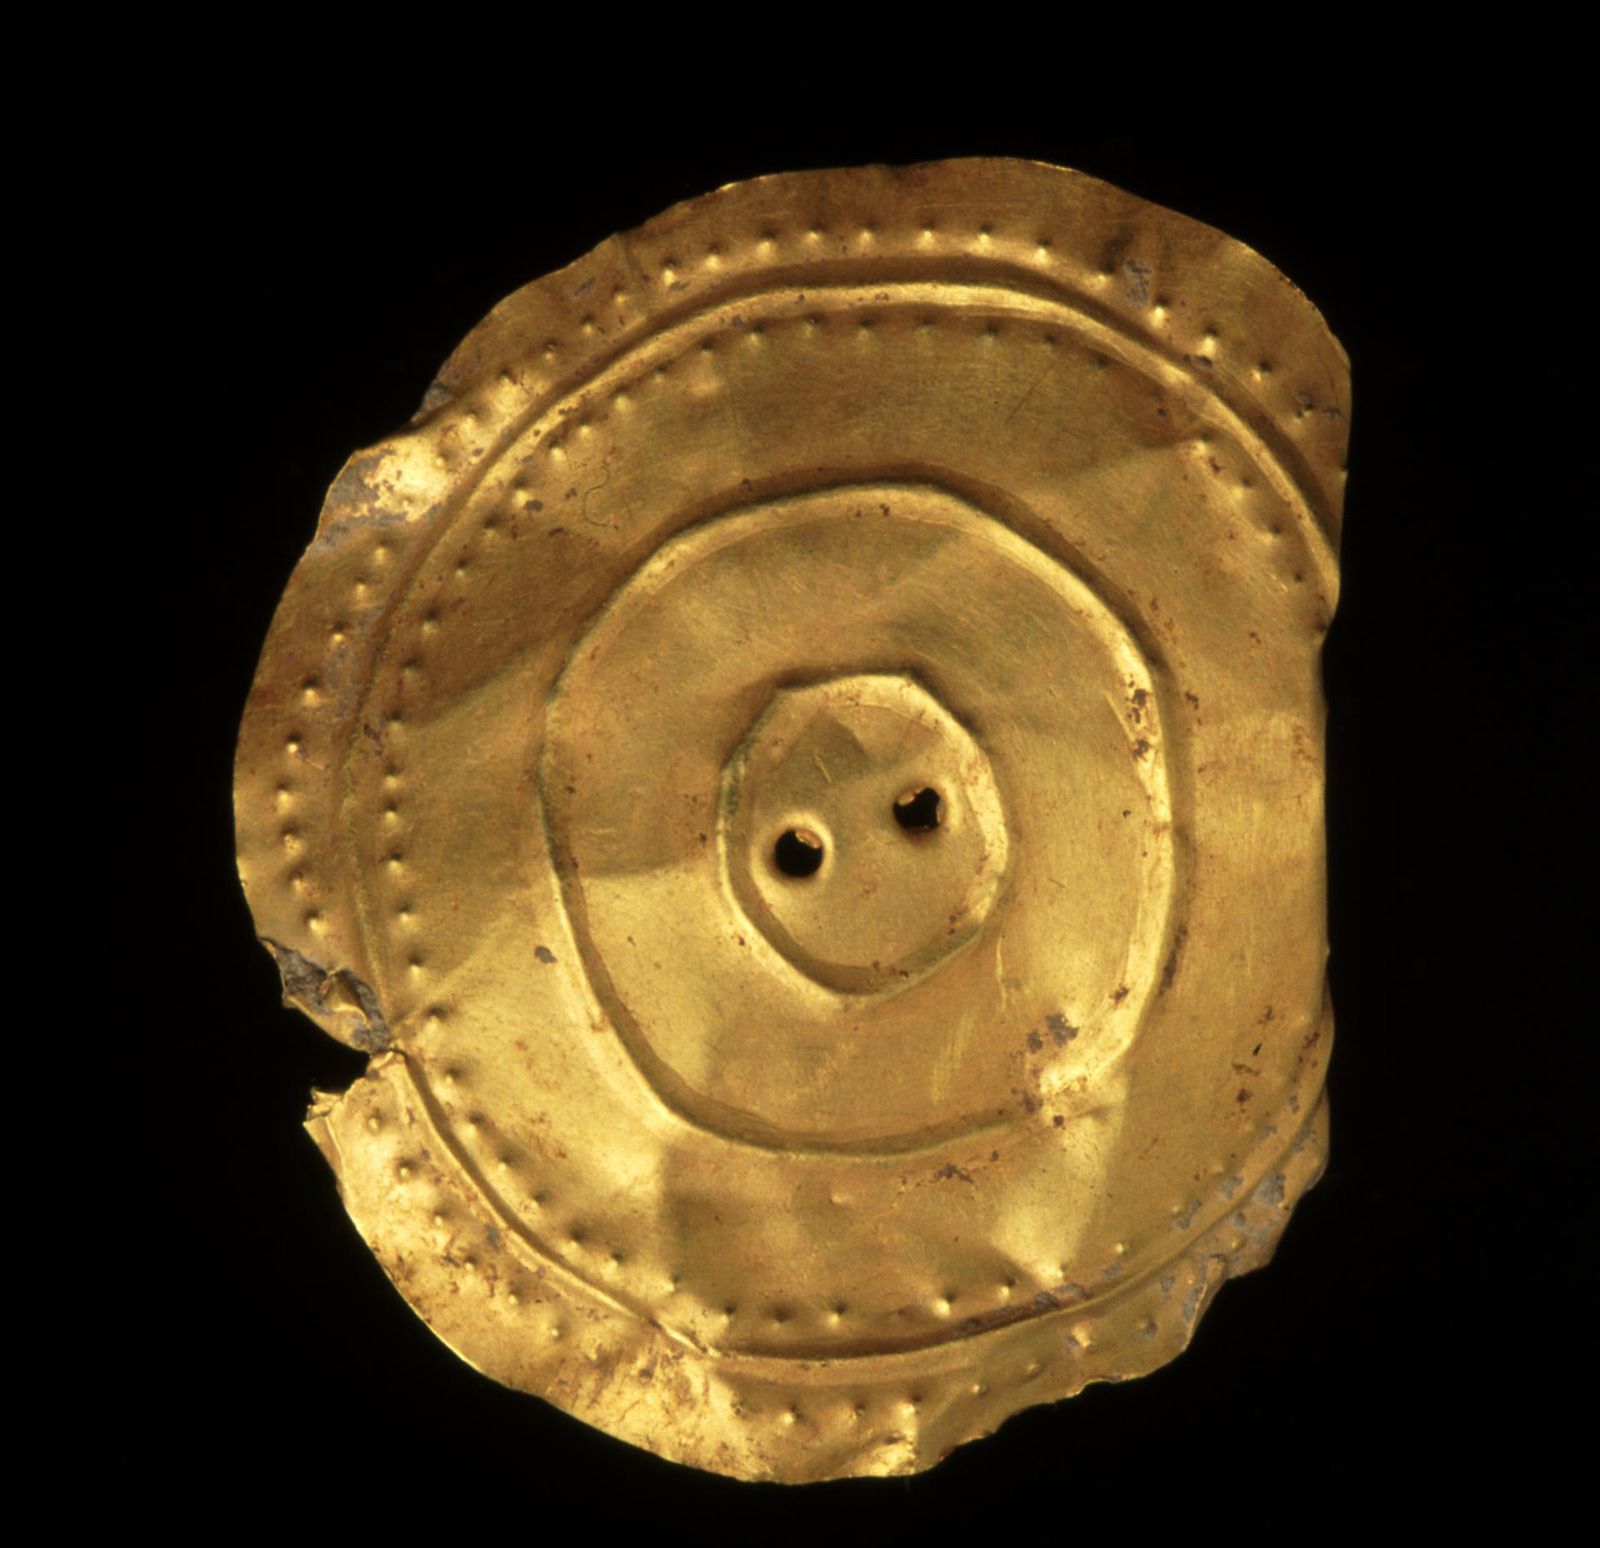 photograph of gold disc with repousse design